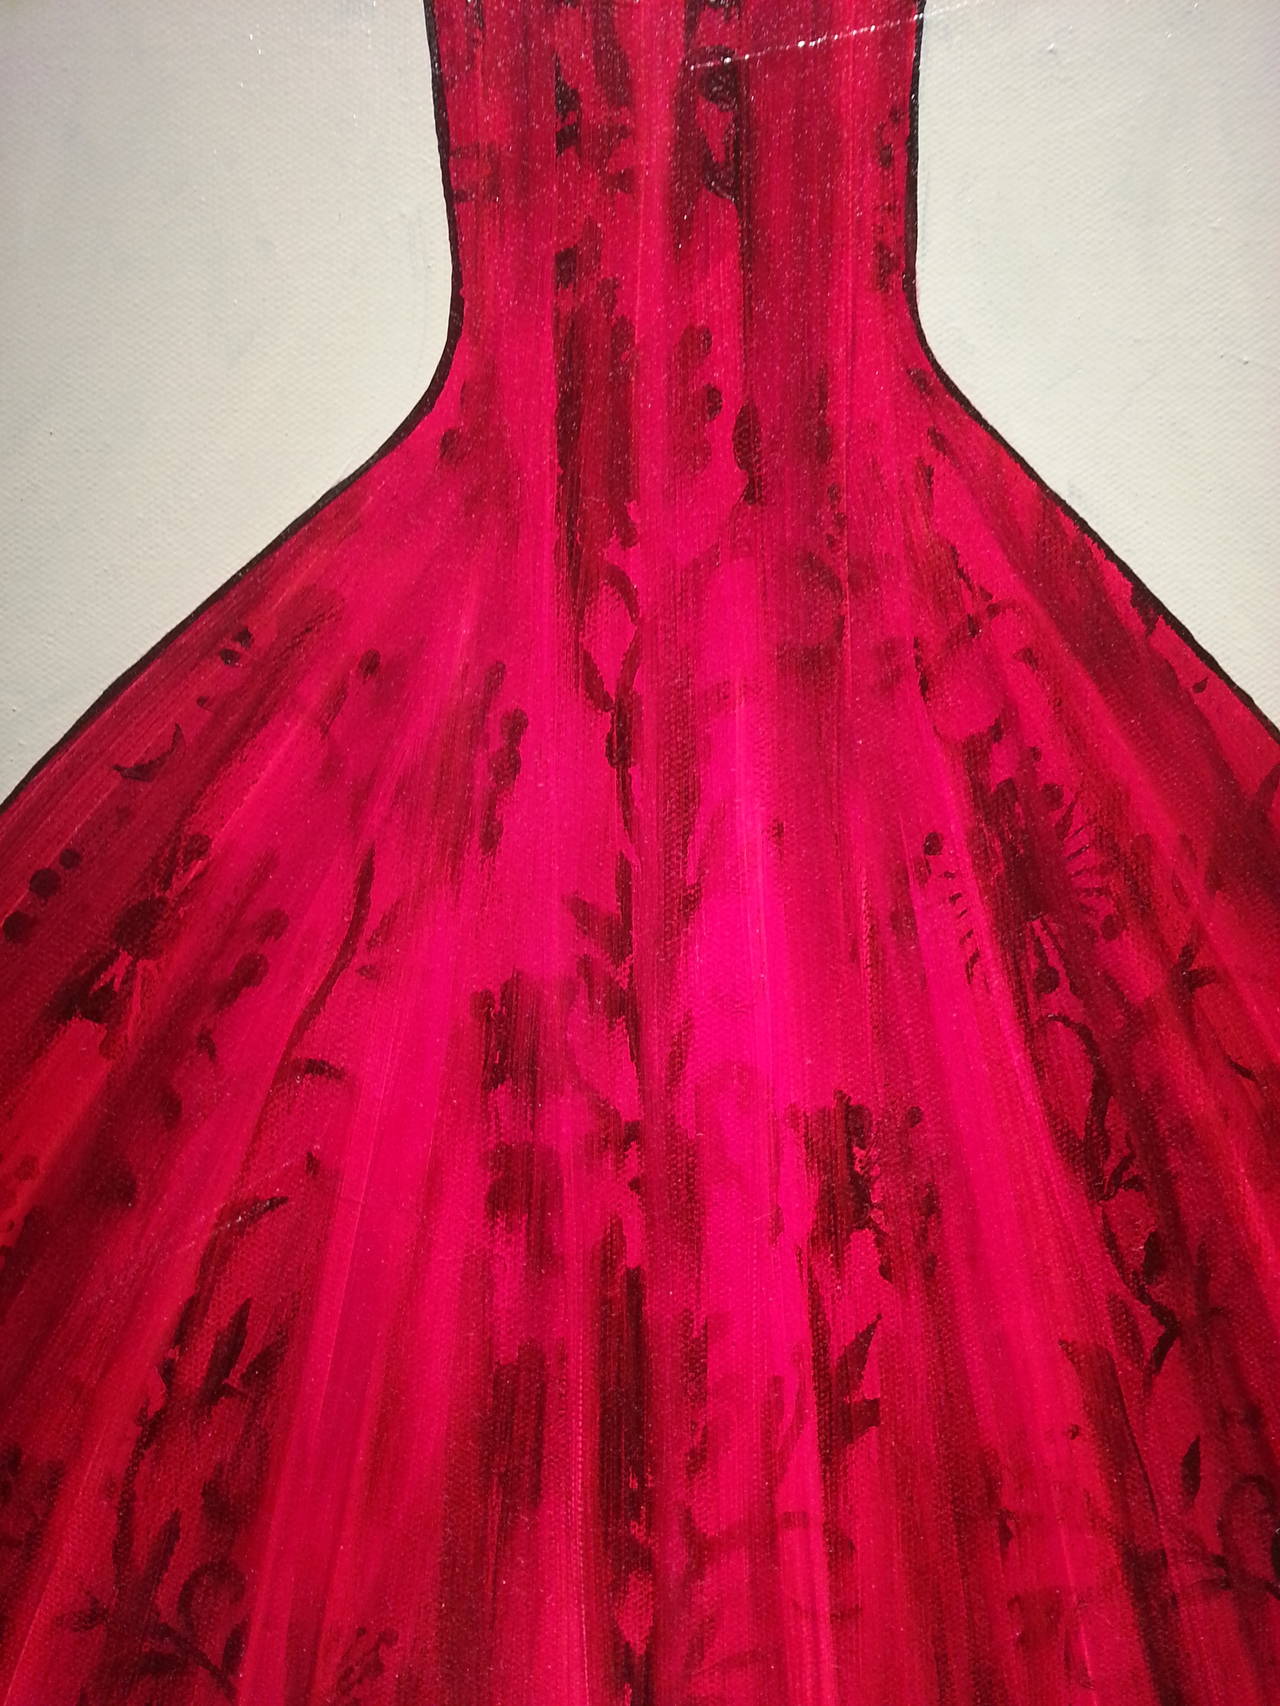 Red Dress - Contemporary Painting by Marketa Sivek